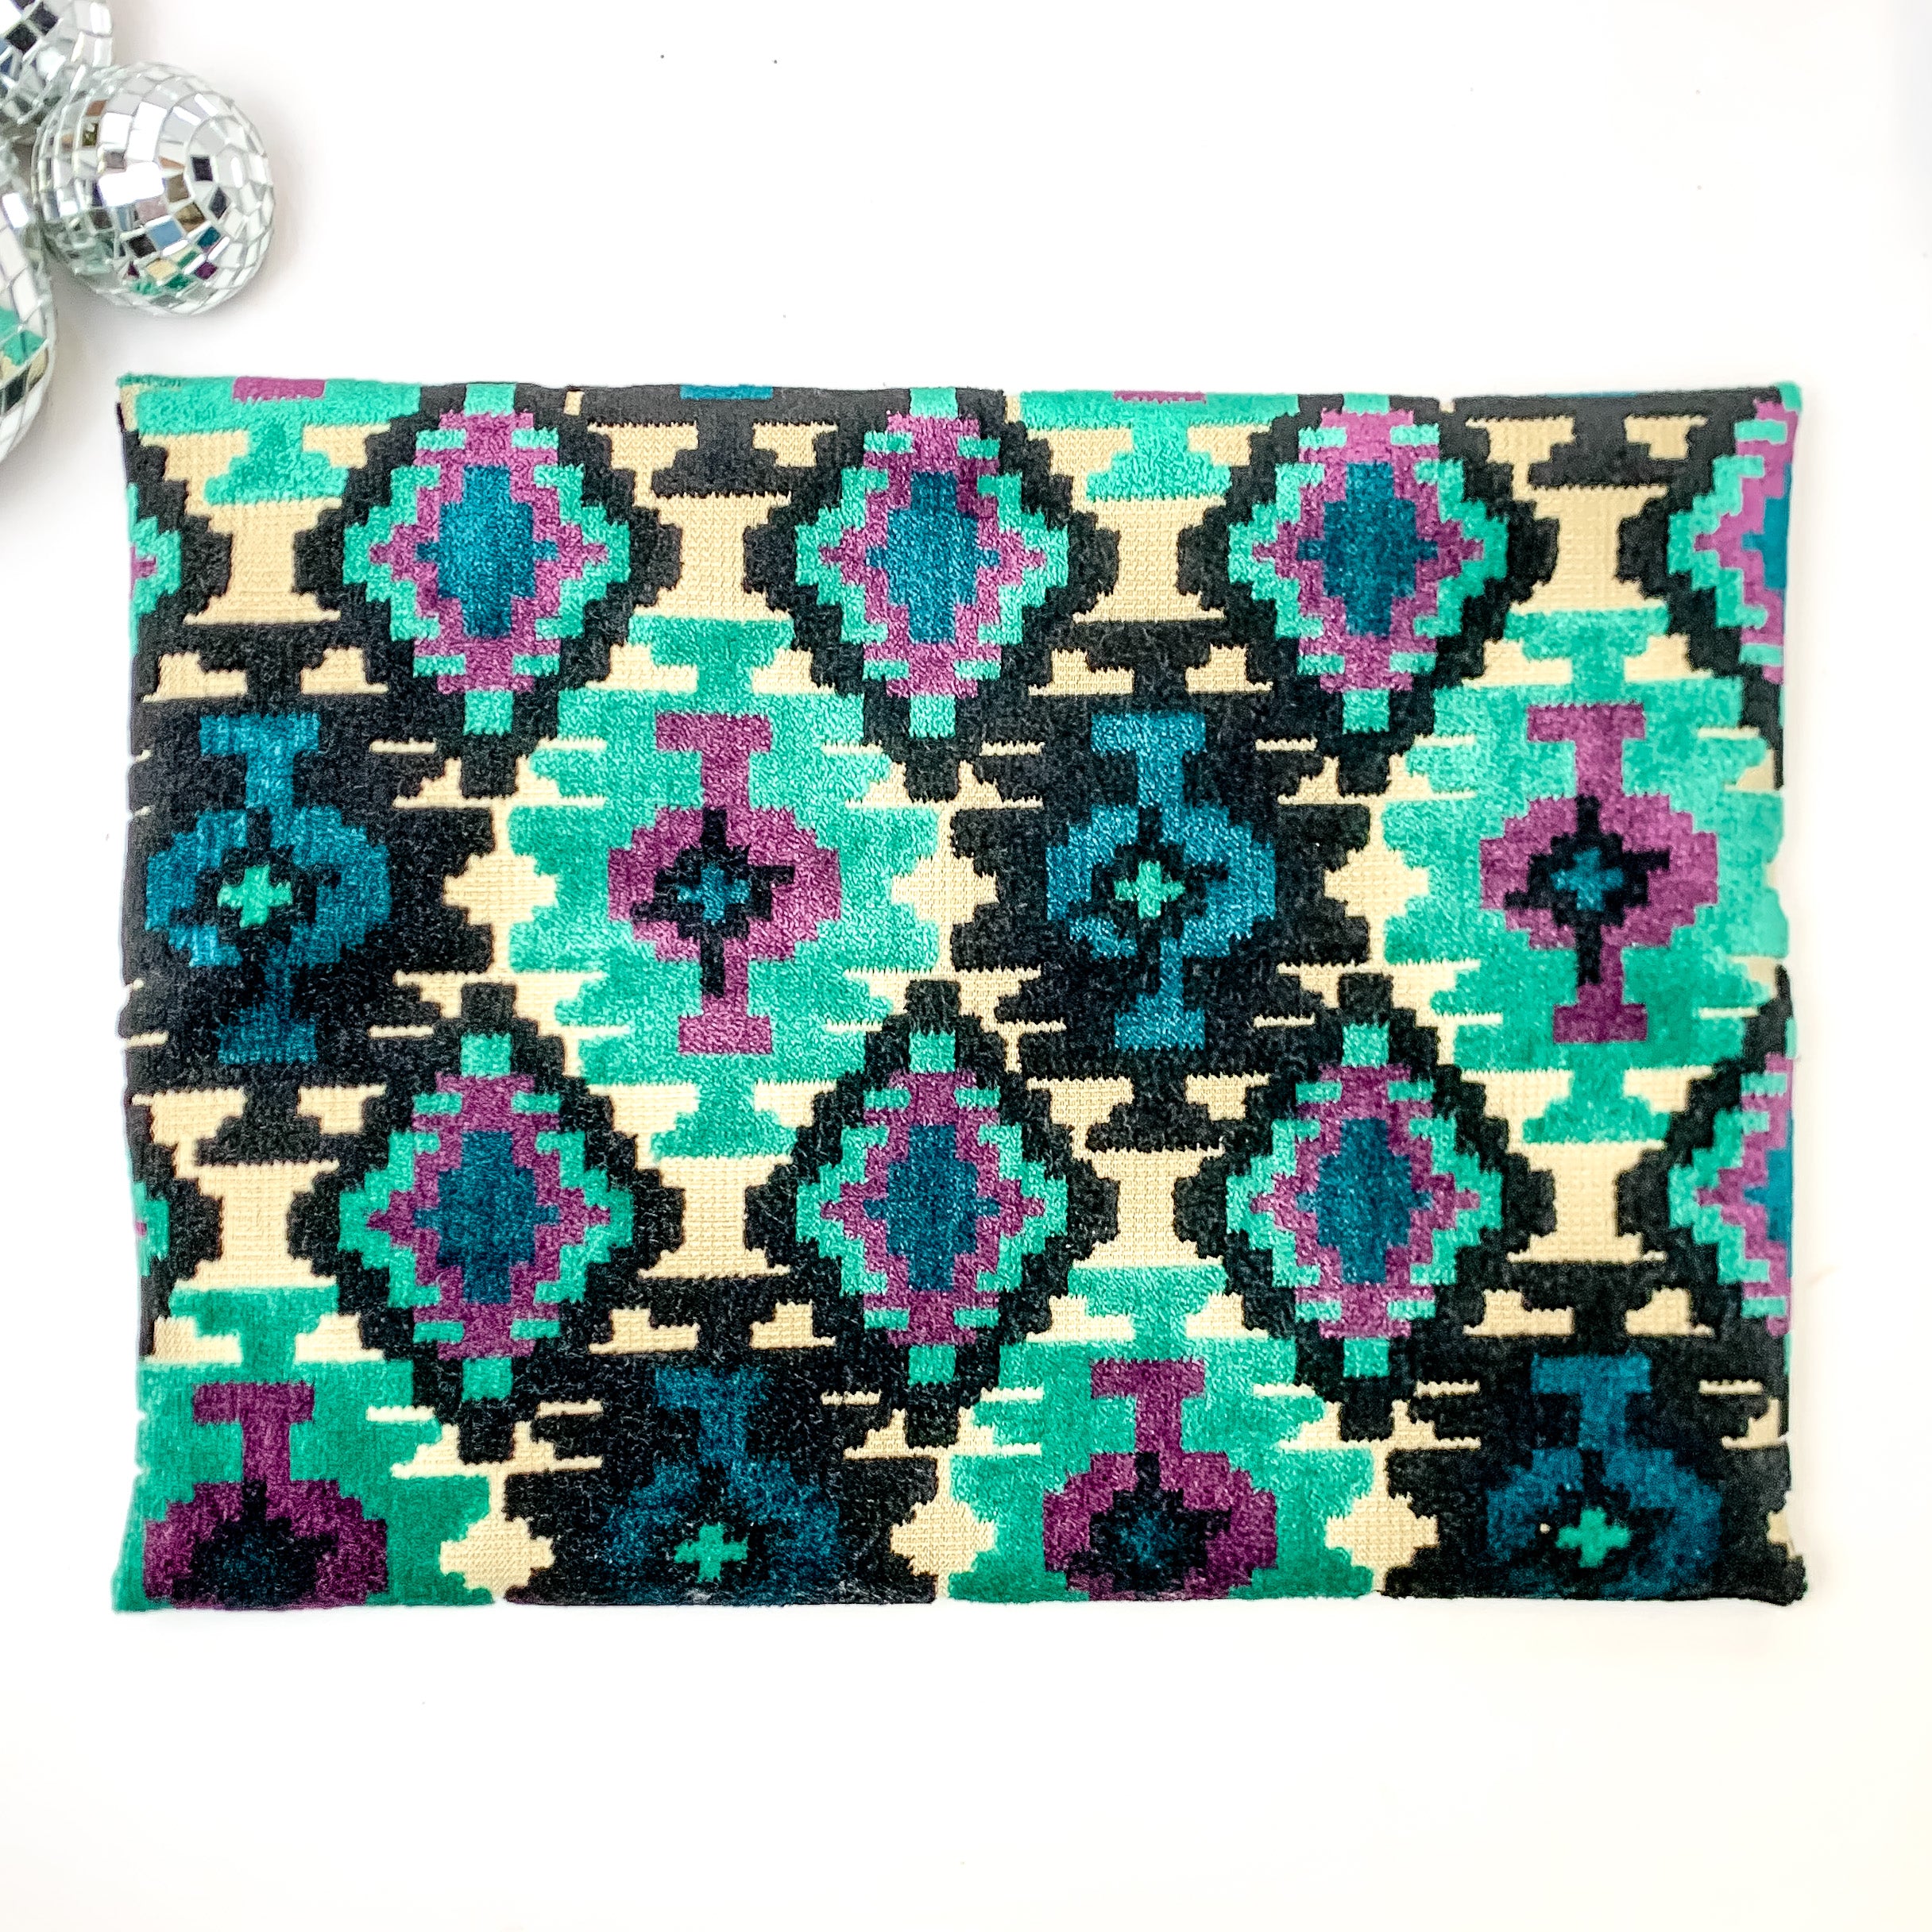 Makeup Junkie | Large Midnight Aztec Lay Flat Bag in Turquoise Green and Black Mix - Giddy Up Glamour Boutique